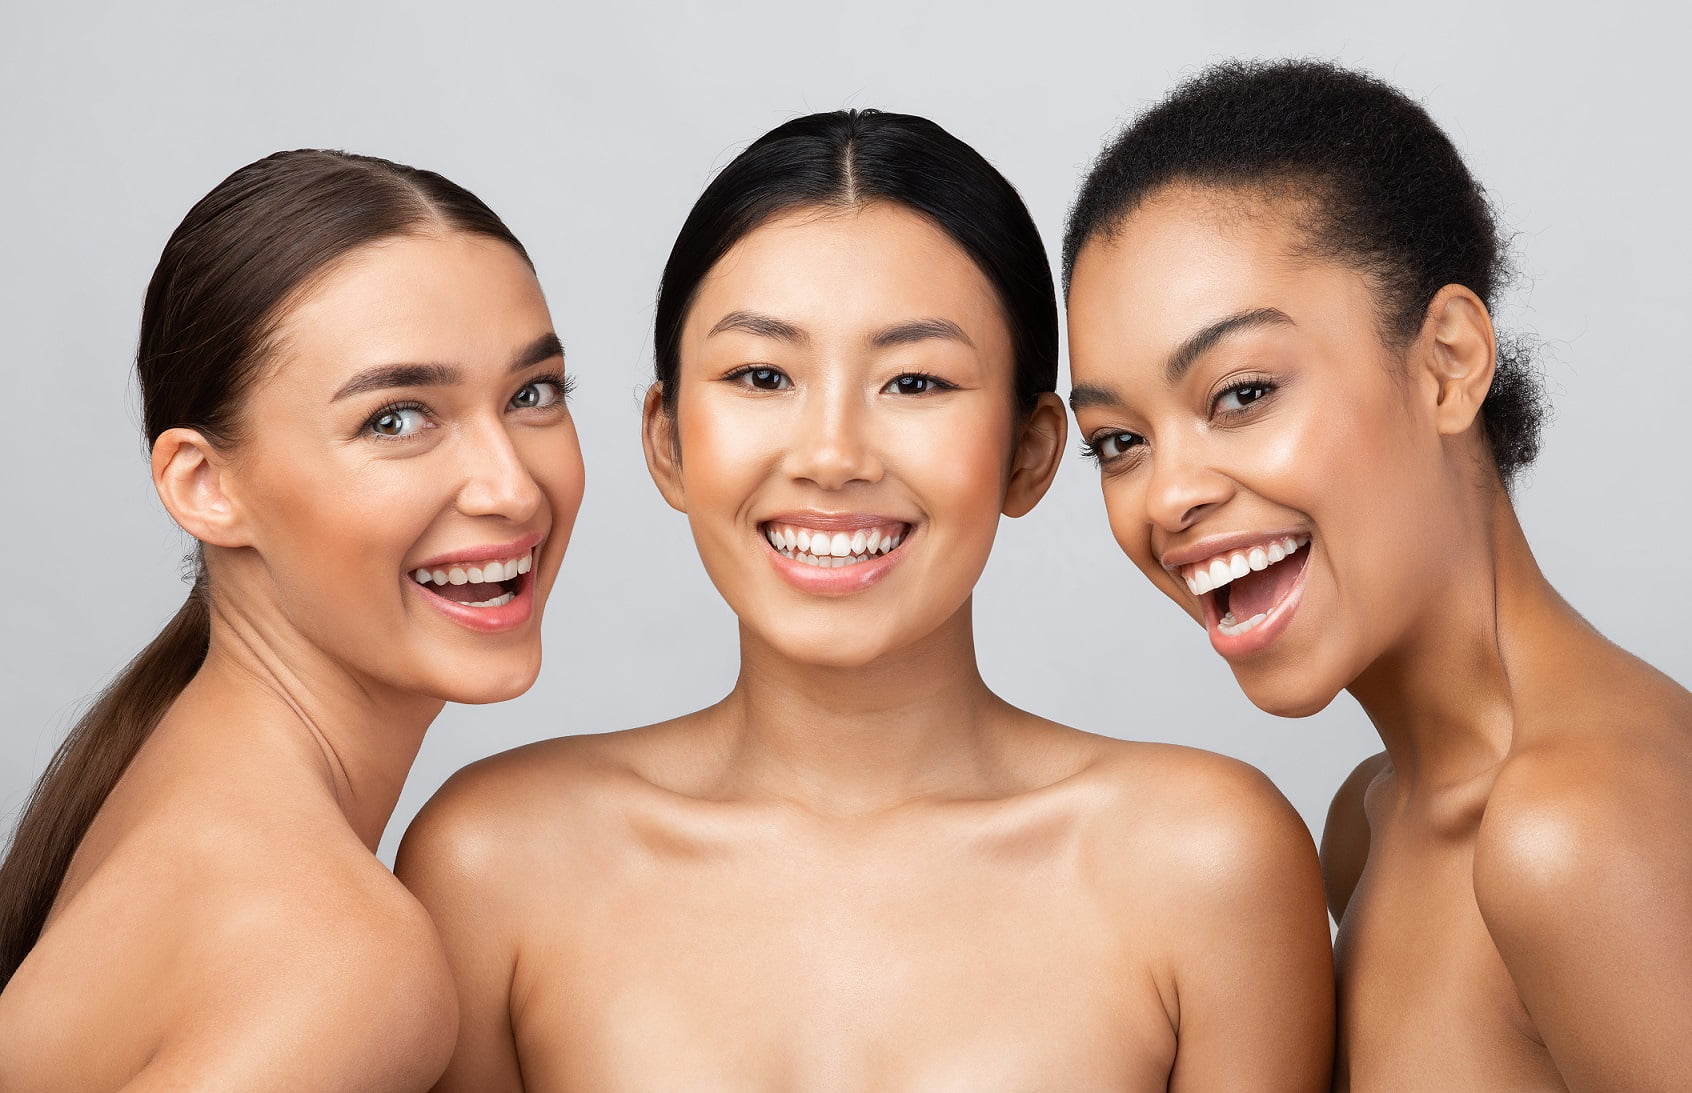 Three Joyful Female Models Smiling To Camera Pose | Avail Aesthetics in Wake Forest, Raleigh, & Cary, NC